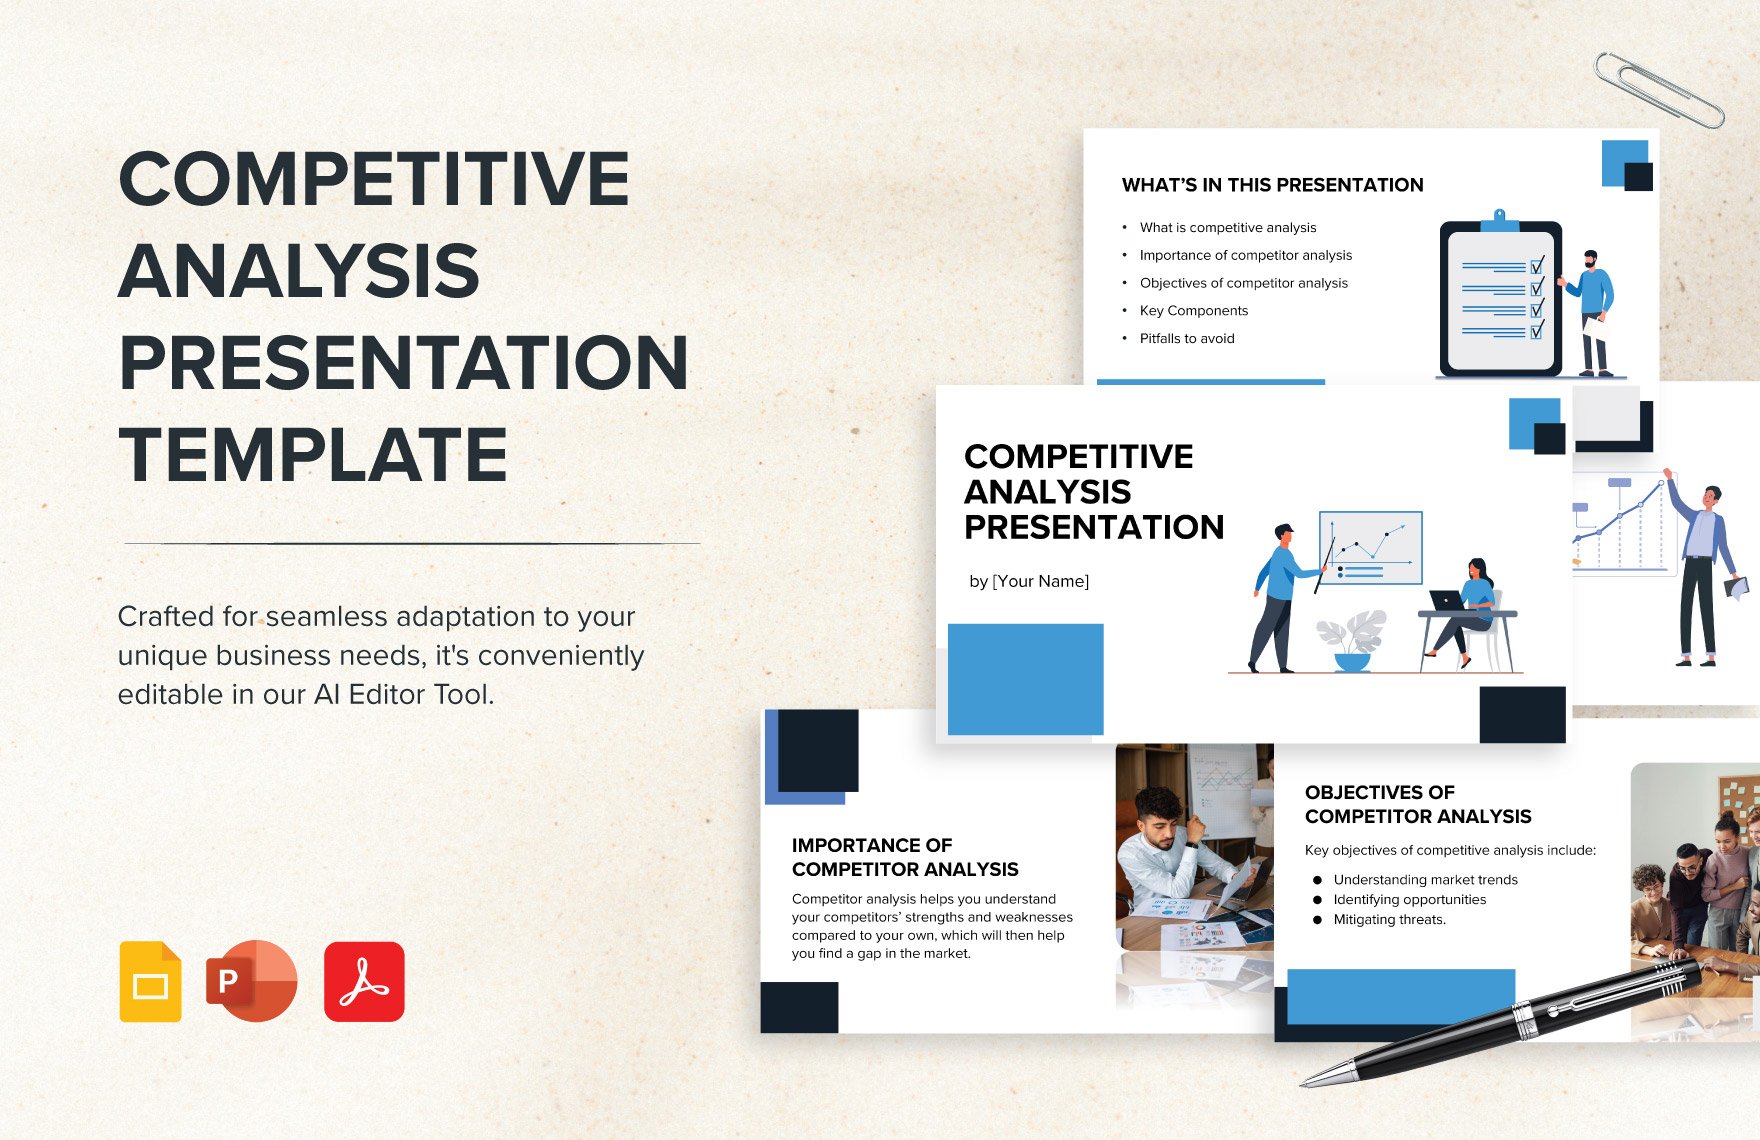 Free Competitive Analysis Presentation Template in PDF, PowerPoint, Google Slides